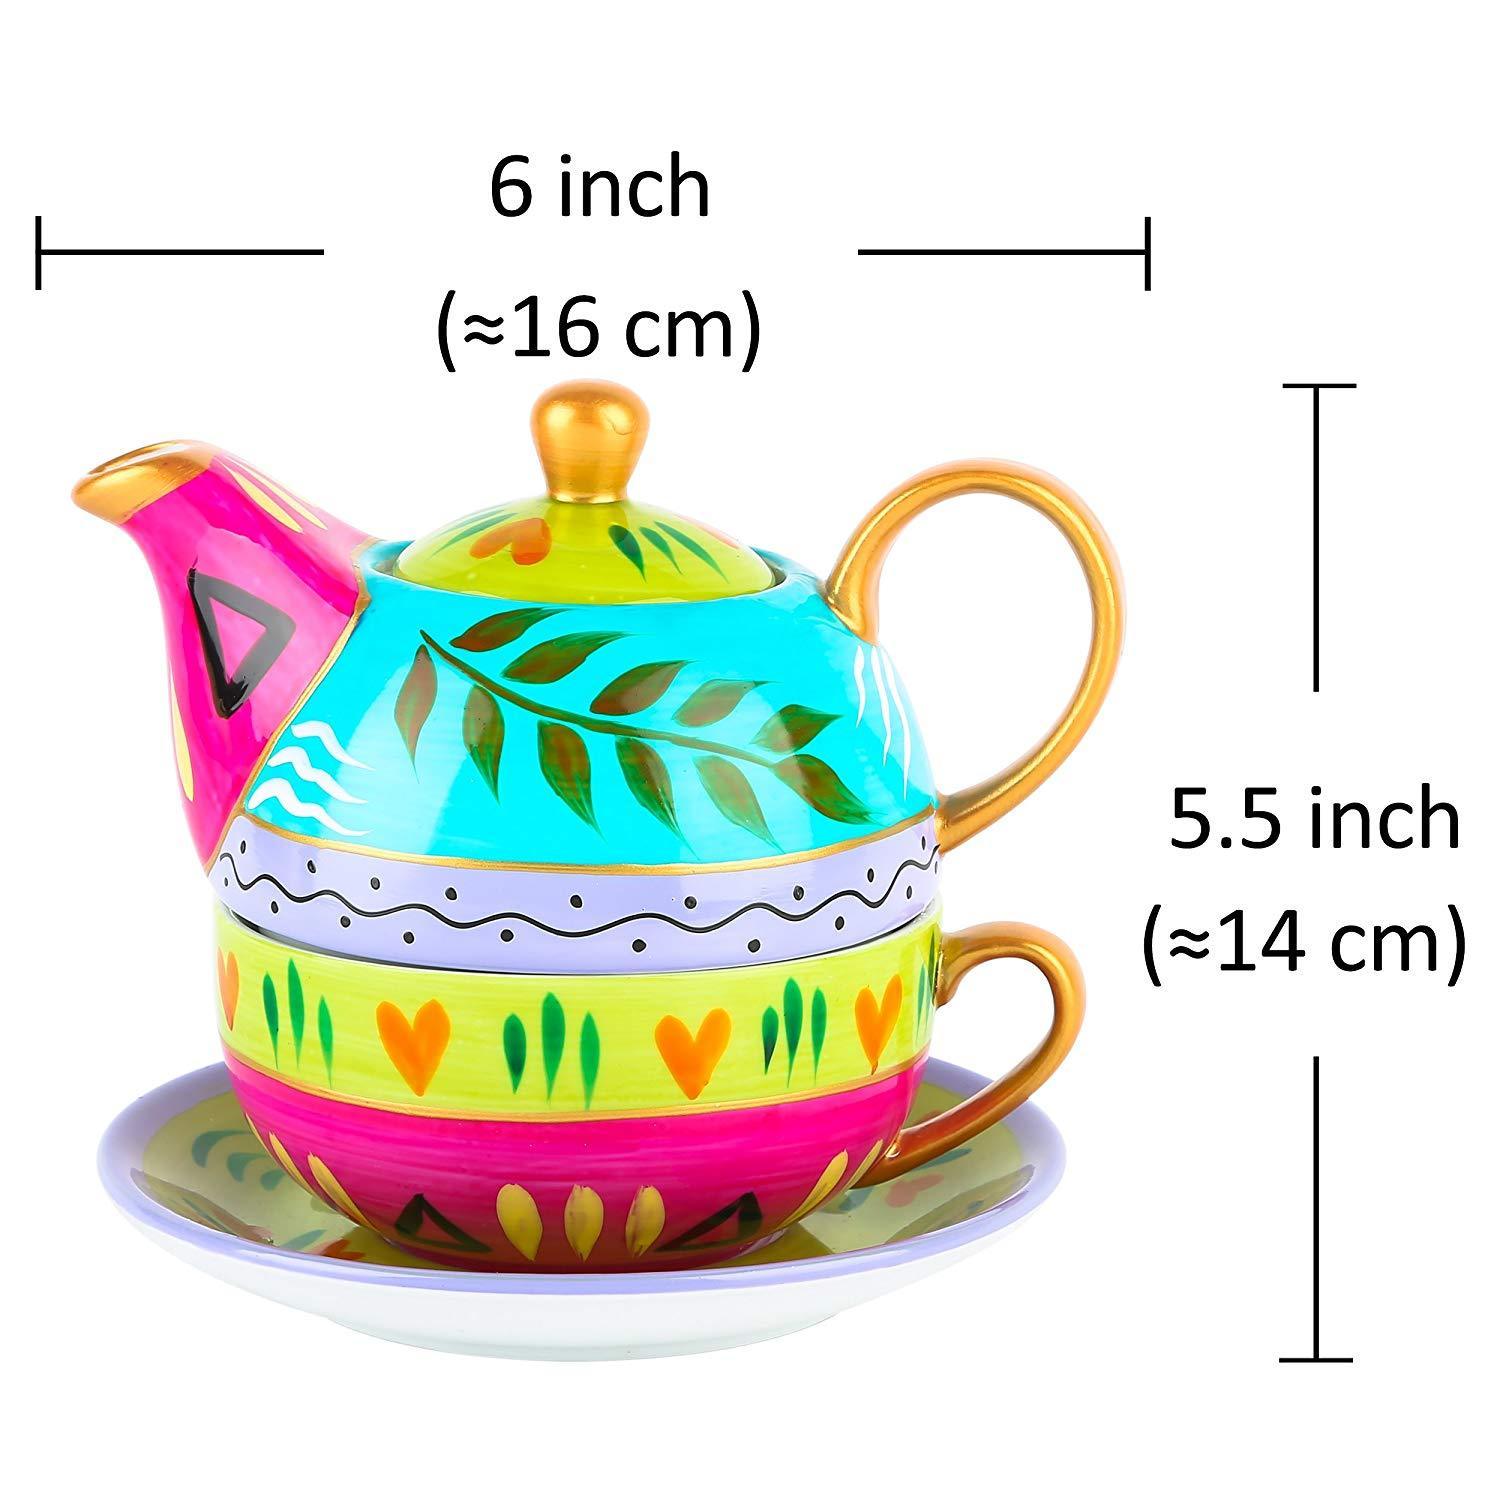 Portable Travel Tea Set for One with One Teapot,Cup and Saucer Stackable Porcelain Office Personal Teaware Set - Nordic Side - and, ARTVIGOR, for, Office, One, Personal, Porcelain, Portable, 